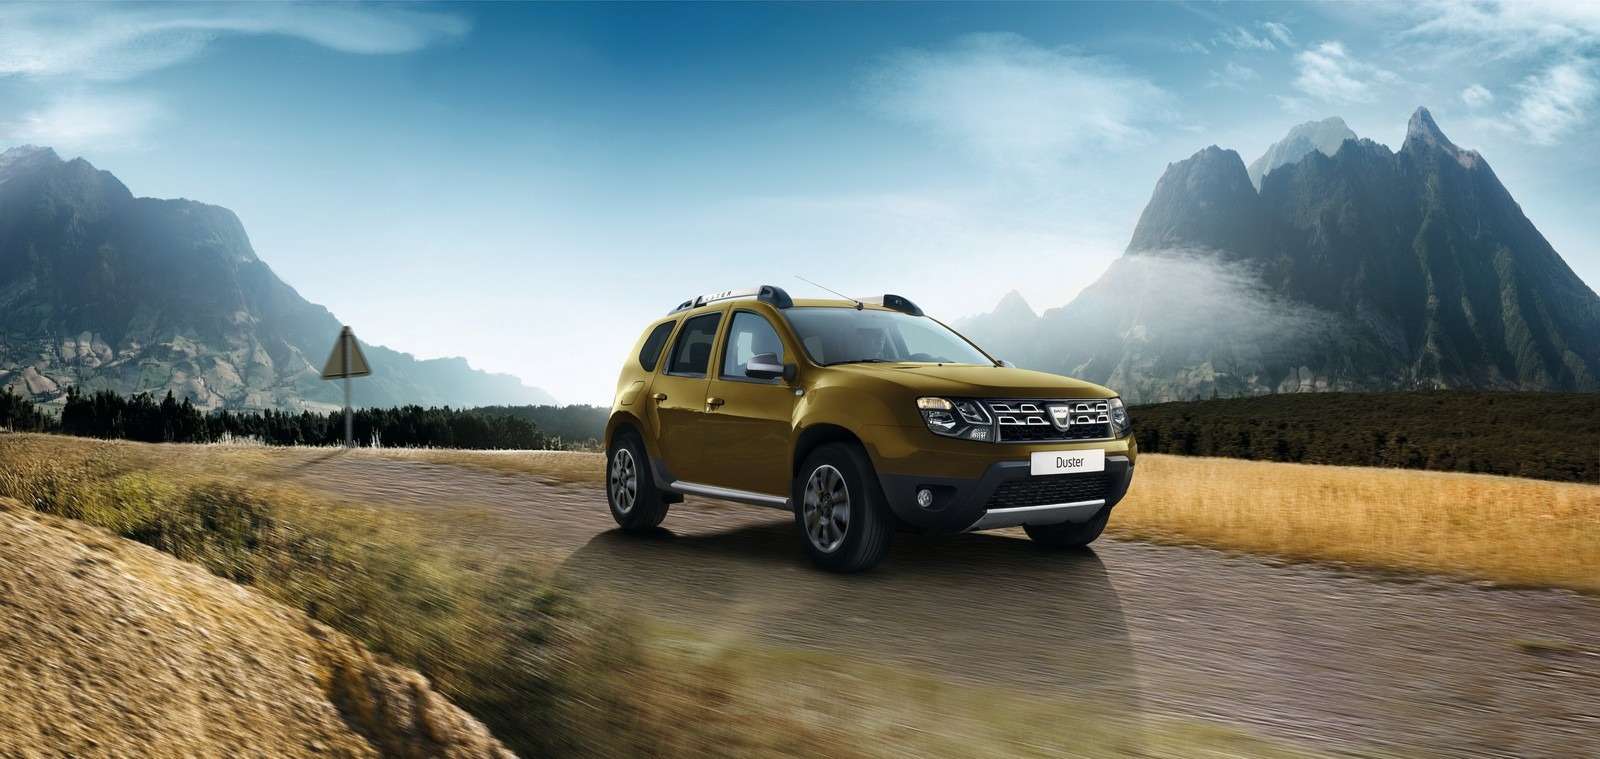 all-new-dacia-duster-caught-in-first-spyshots-plus-dacia-novelties-for-frankfurt-photo-gallery_12